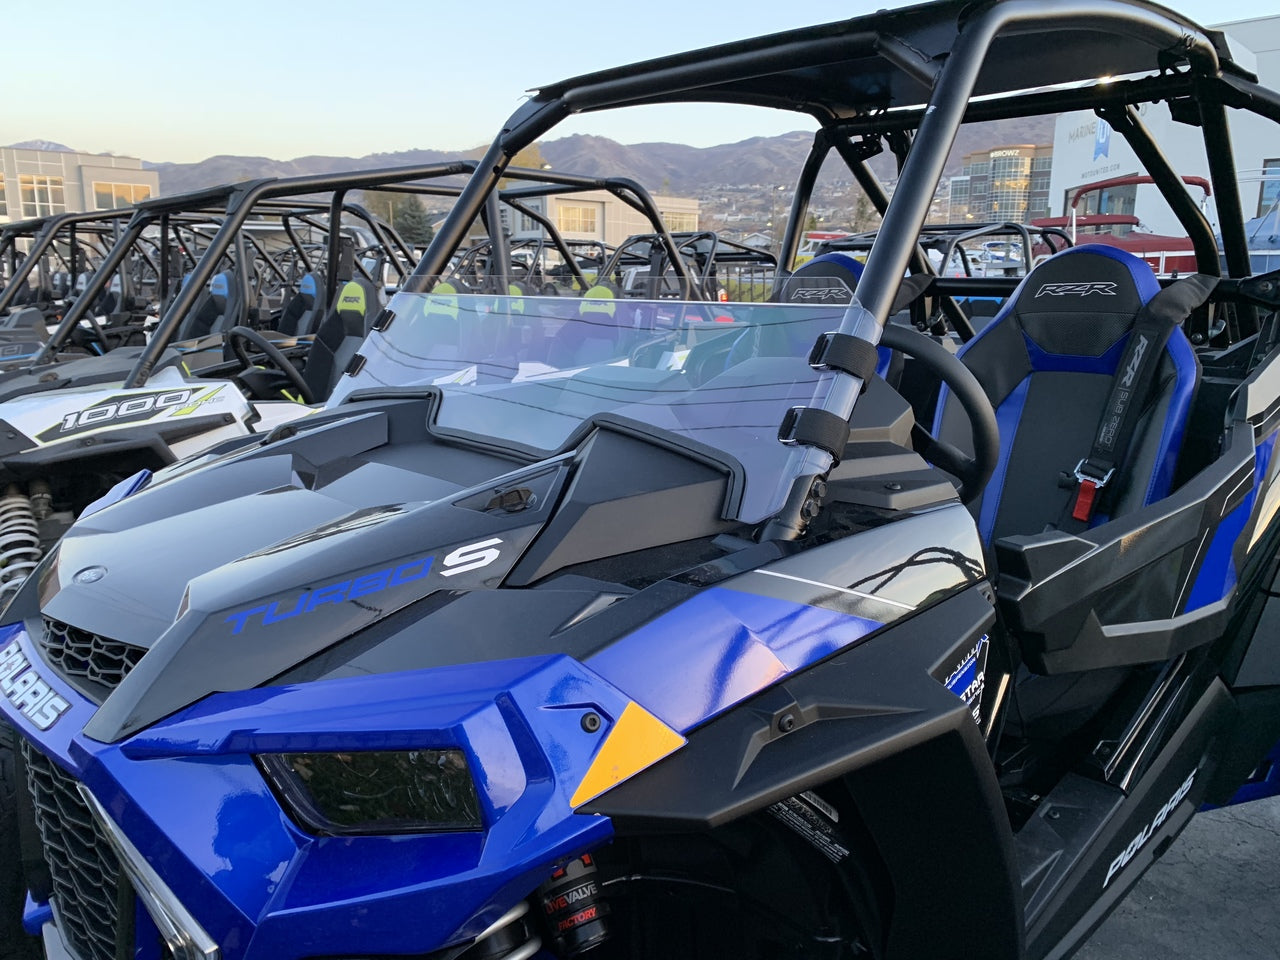 Polycarbonate Hard Coated Half Windshield with Quick Straps for RZR Turbo S and 2019+ RZR 1000, Turbo